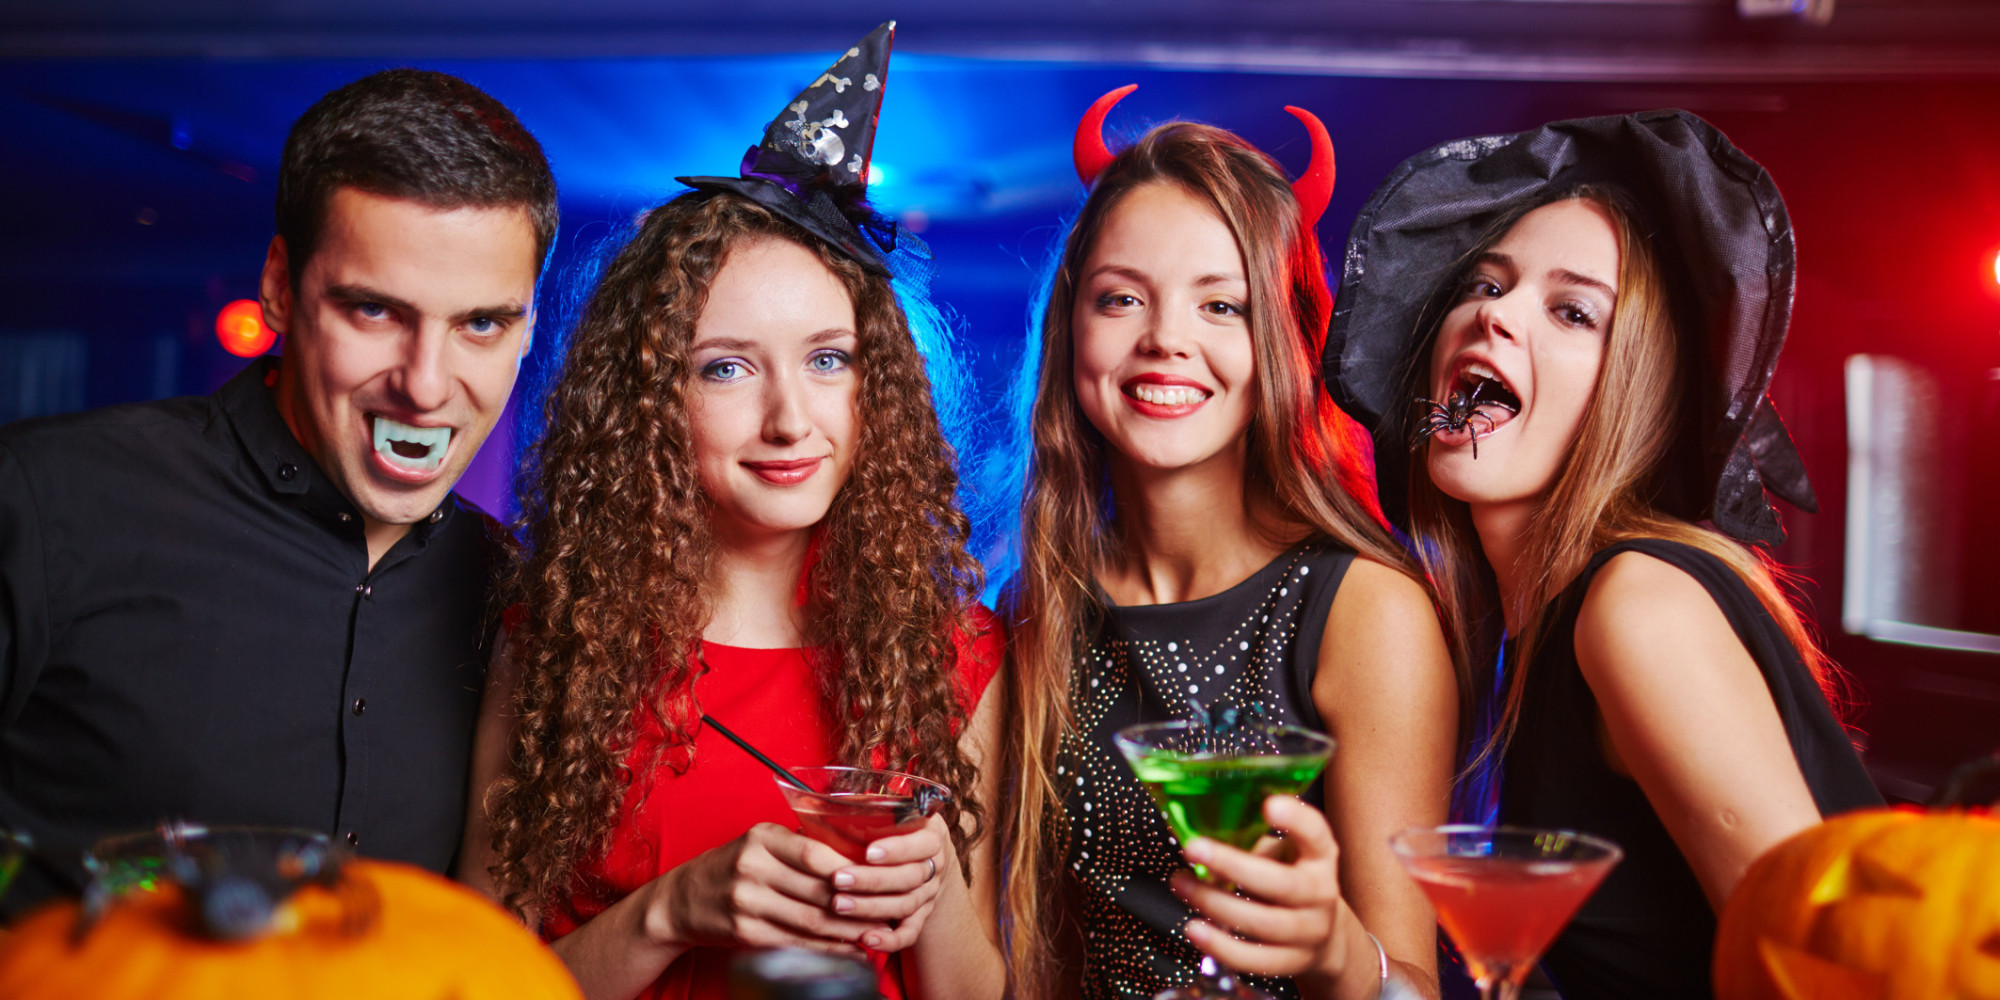 Halloween Costume Ideas College Party
 How to Have Fun While Staying Safe at a College Halloween